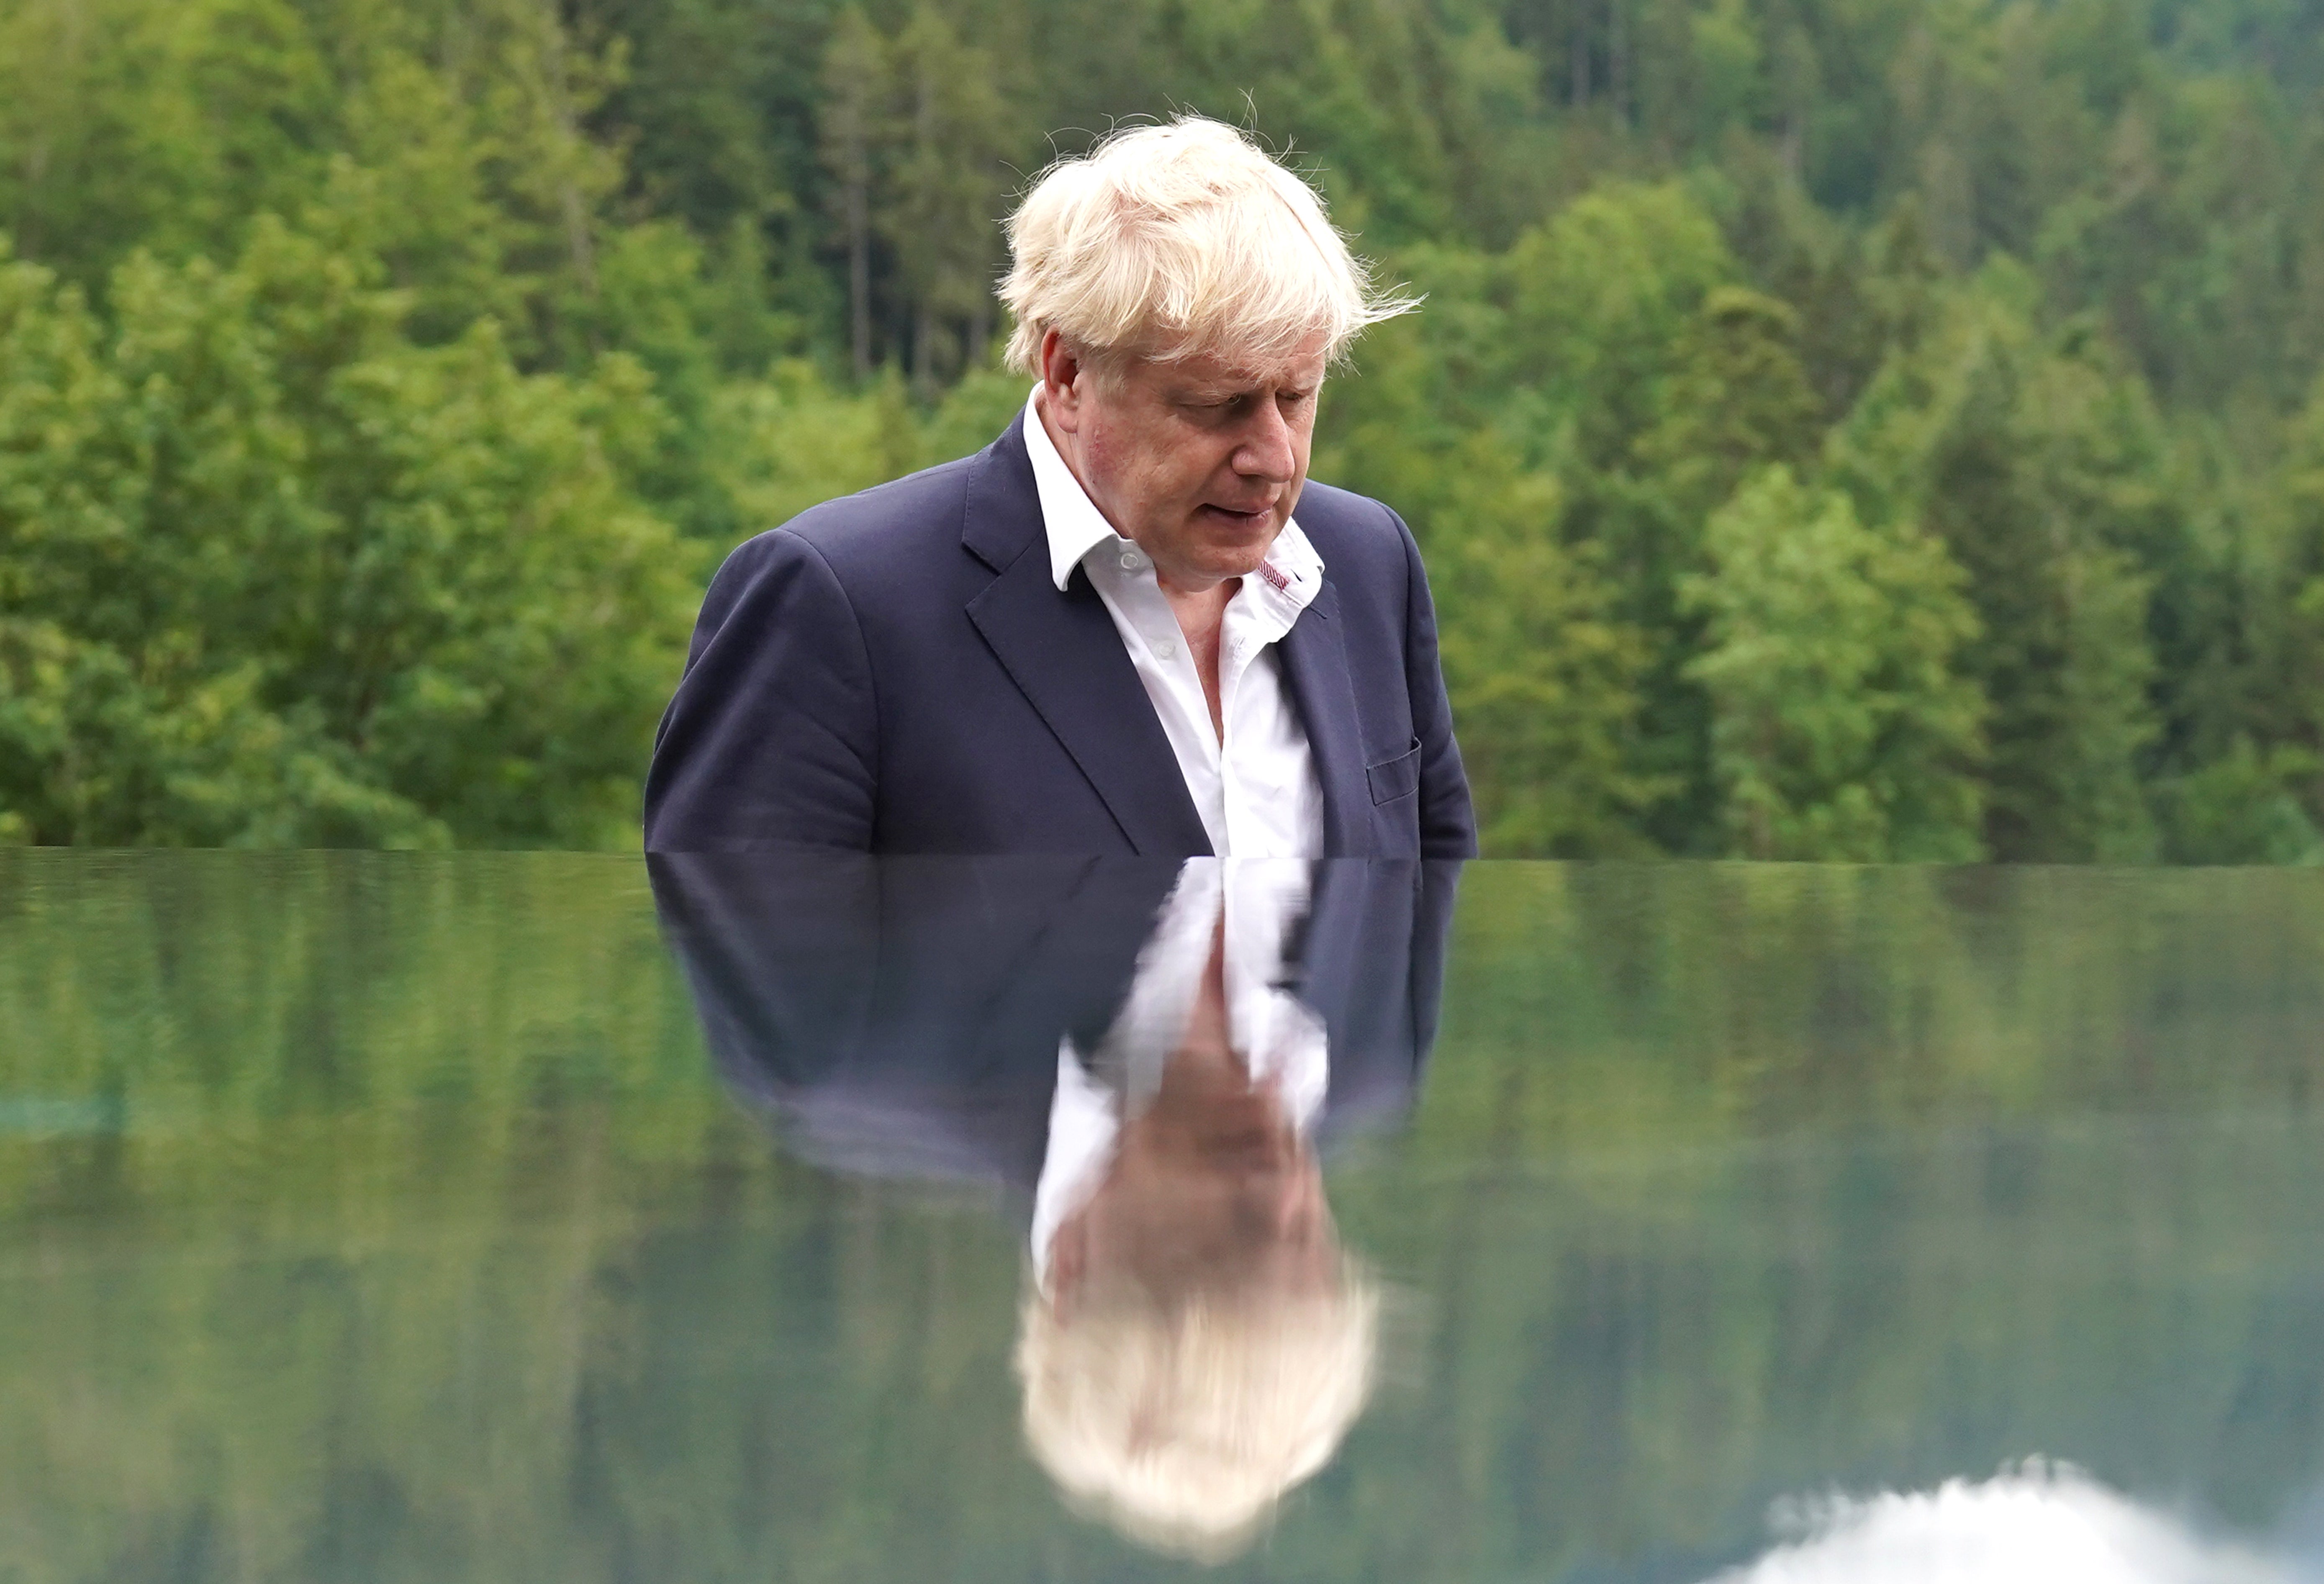 Prime Minister Boris Johnson at the G7 summit in Schloss Elmau, in the Bavarian Alps, Germany (PA)